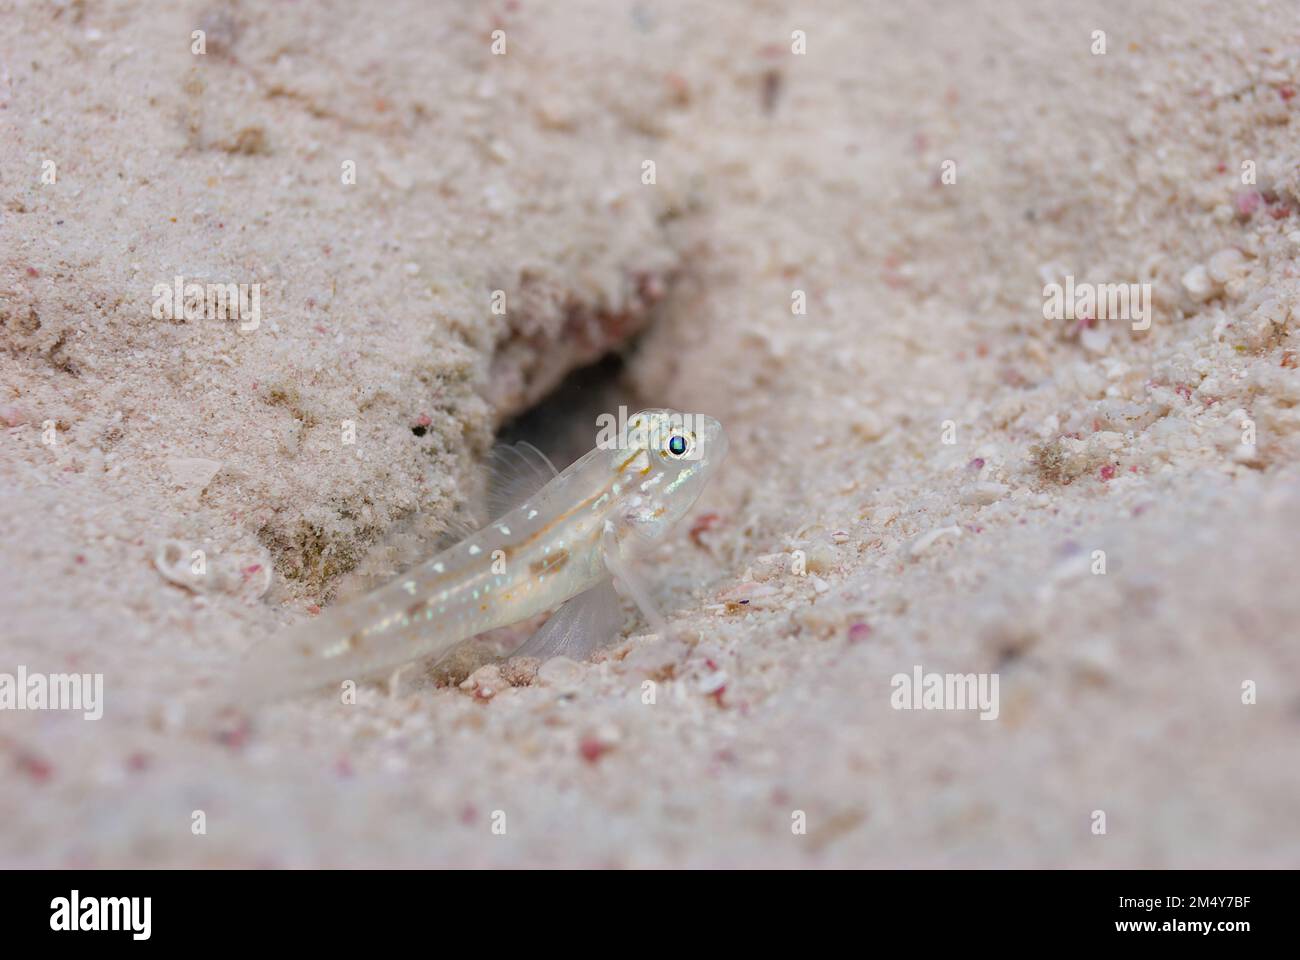 Bridled Goby Coryphopterus glaucofraenum perched next to sand burrow Bonaire Stock Photo